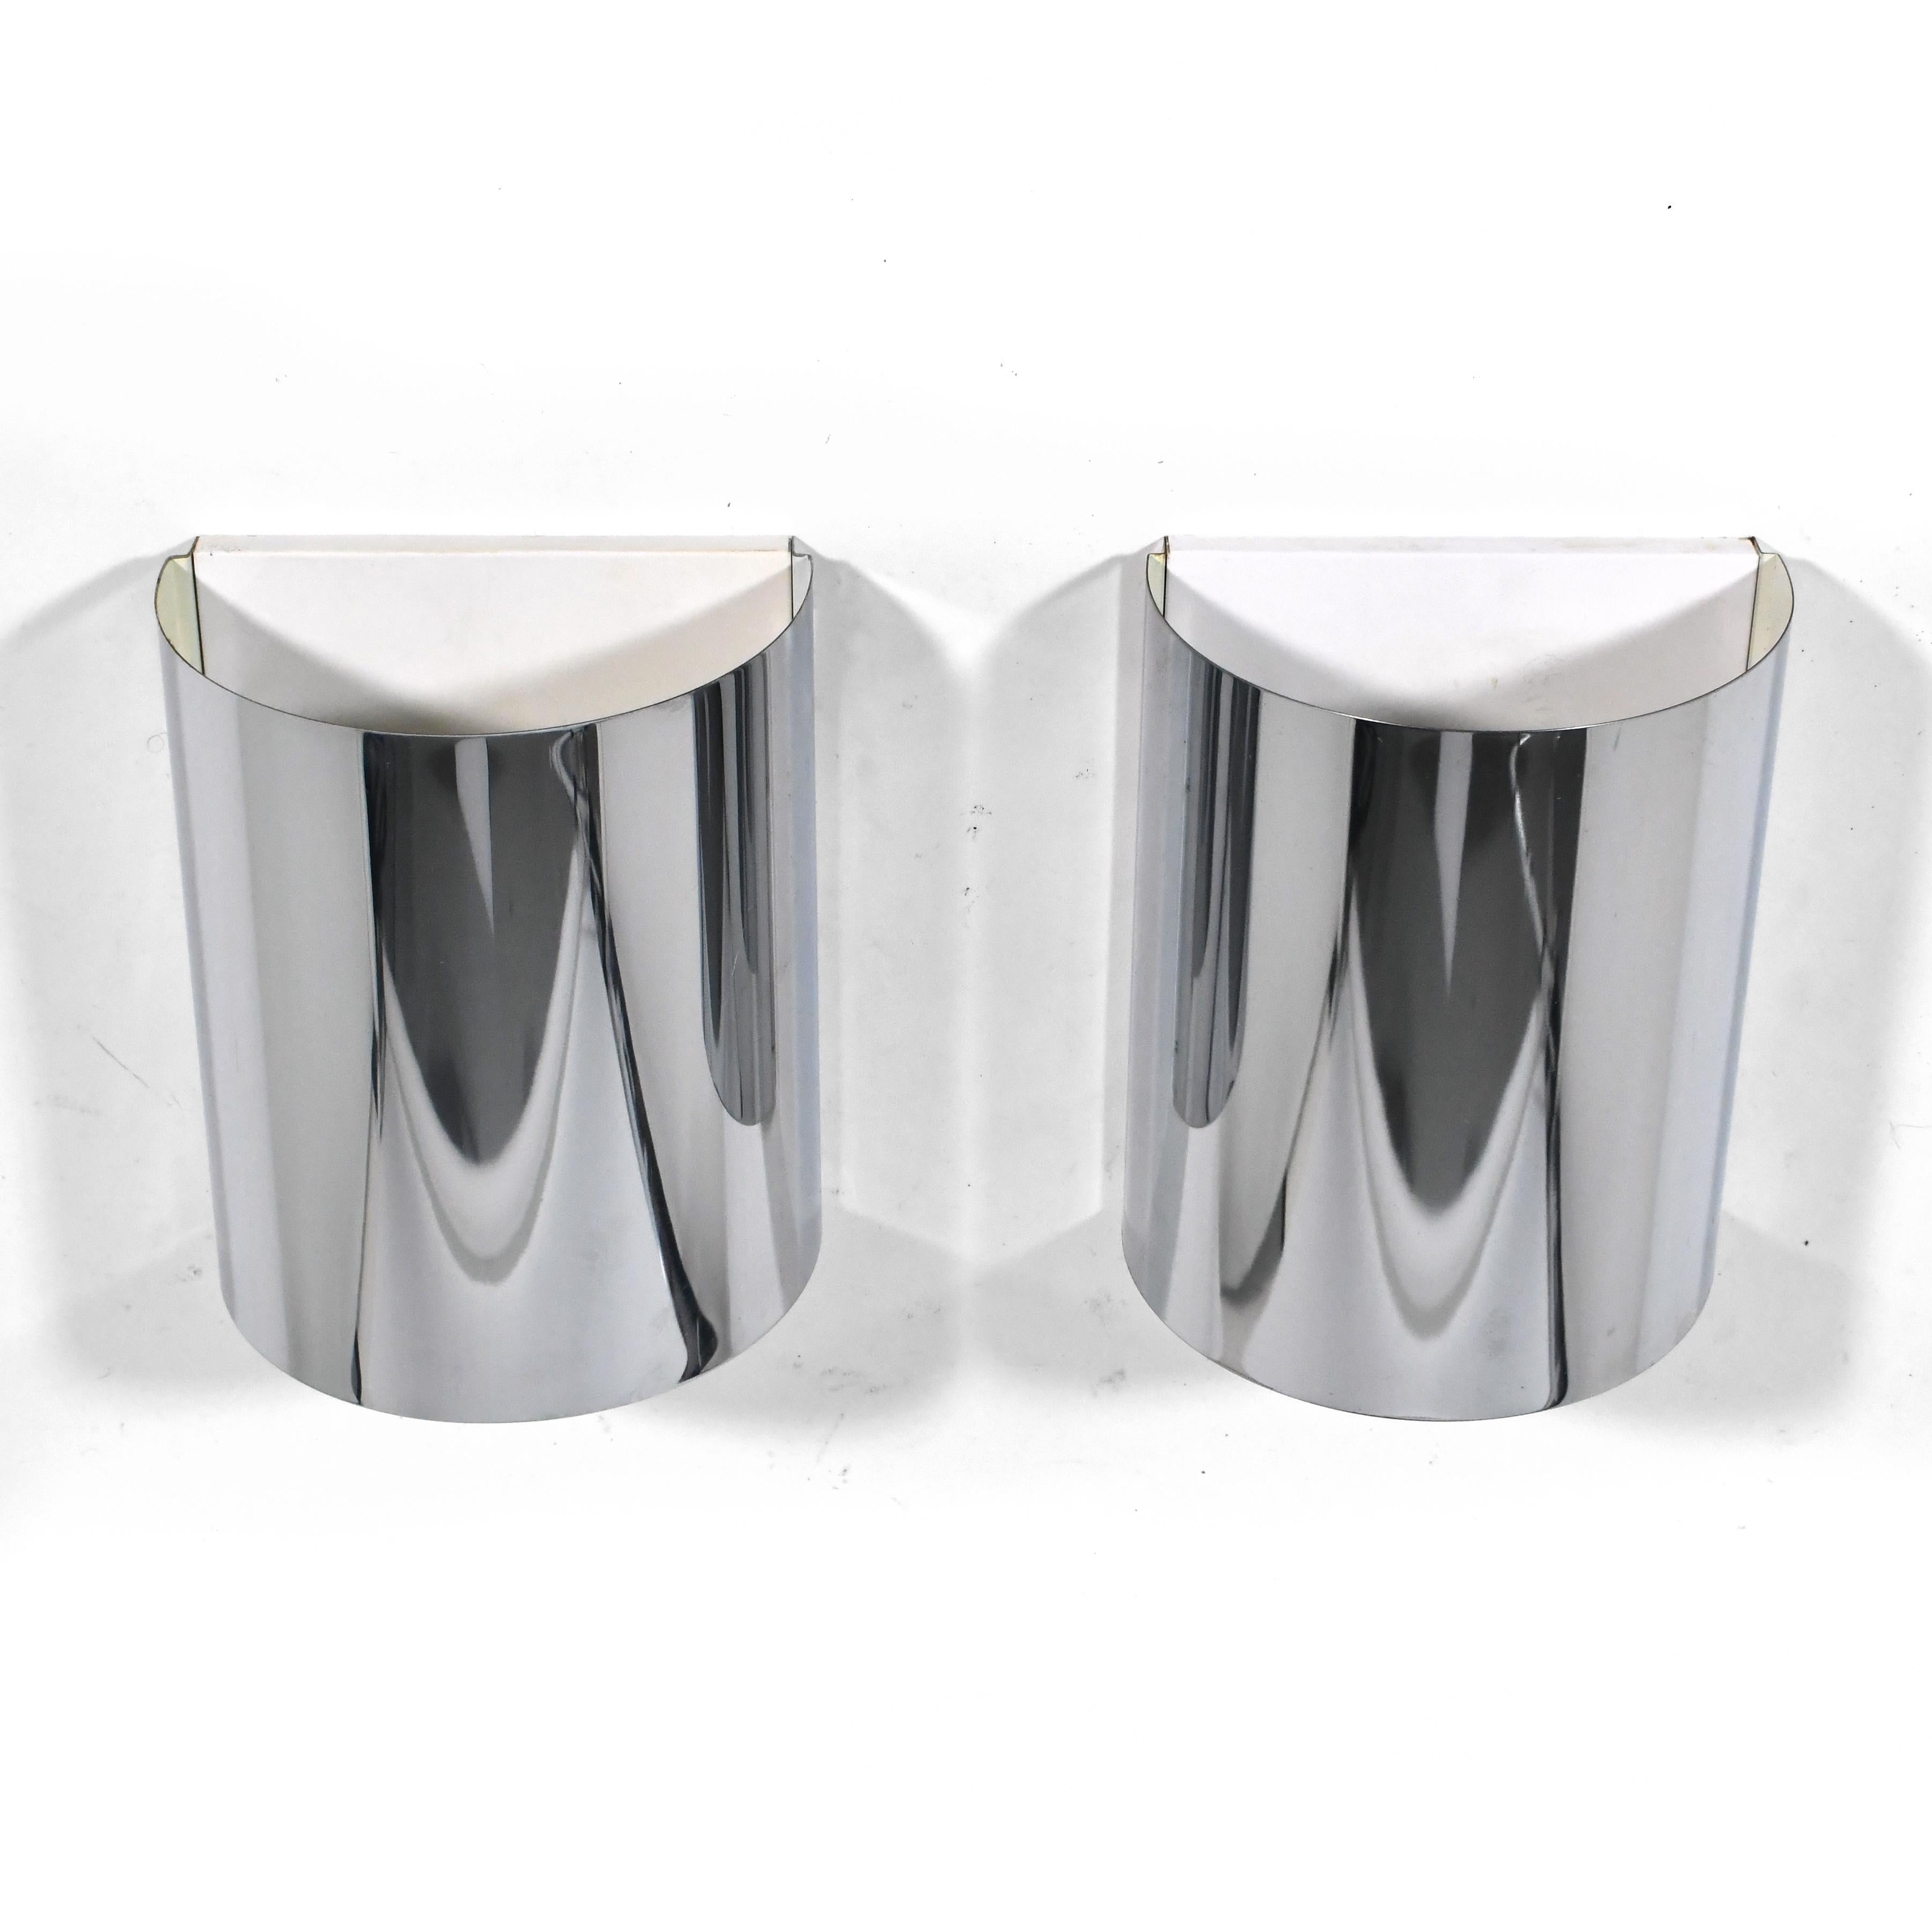 Minimalist Pair of Chrome Wall Sconces in the Manner of Jere In Good Condition For Sale In Highland, IN